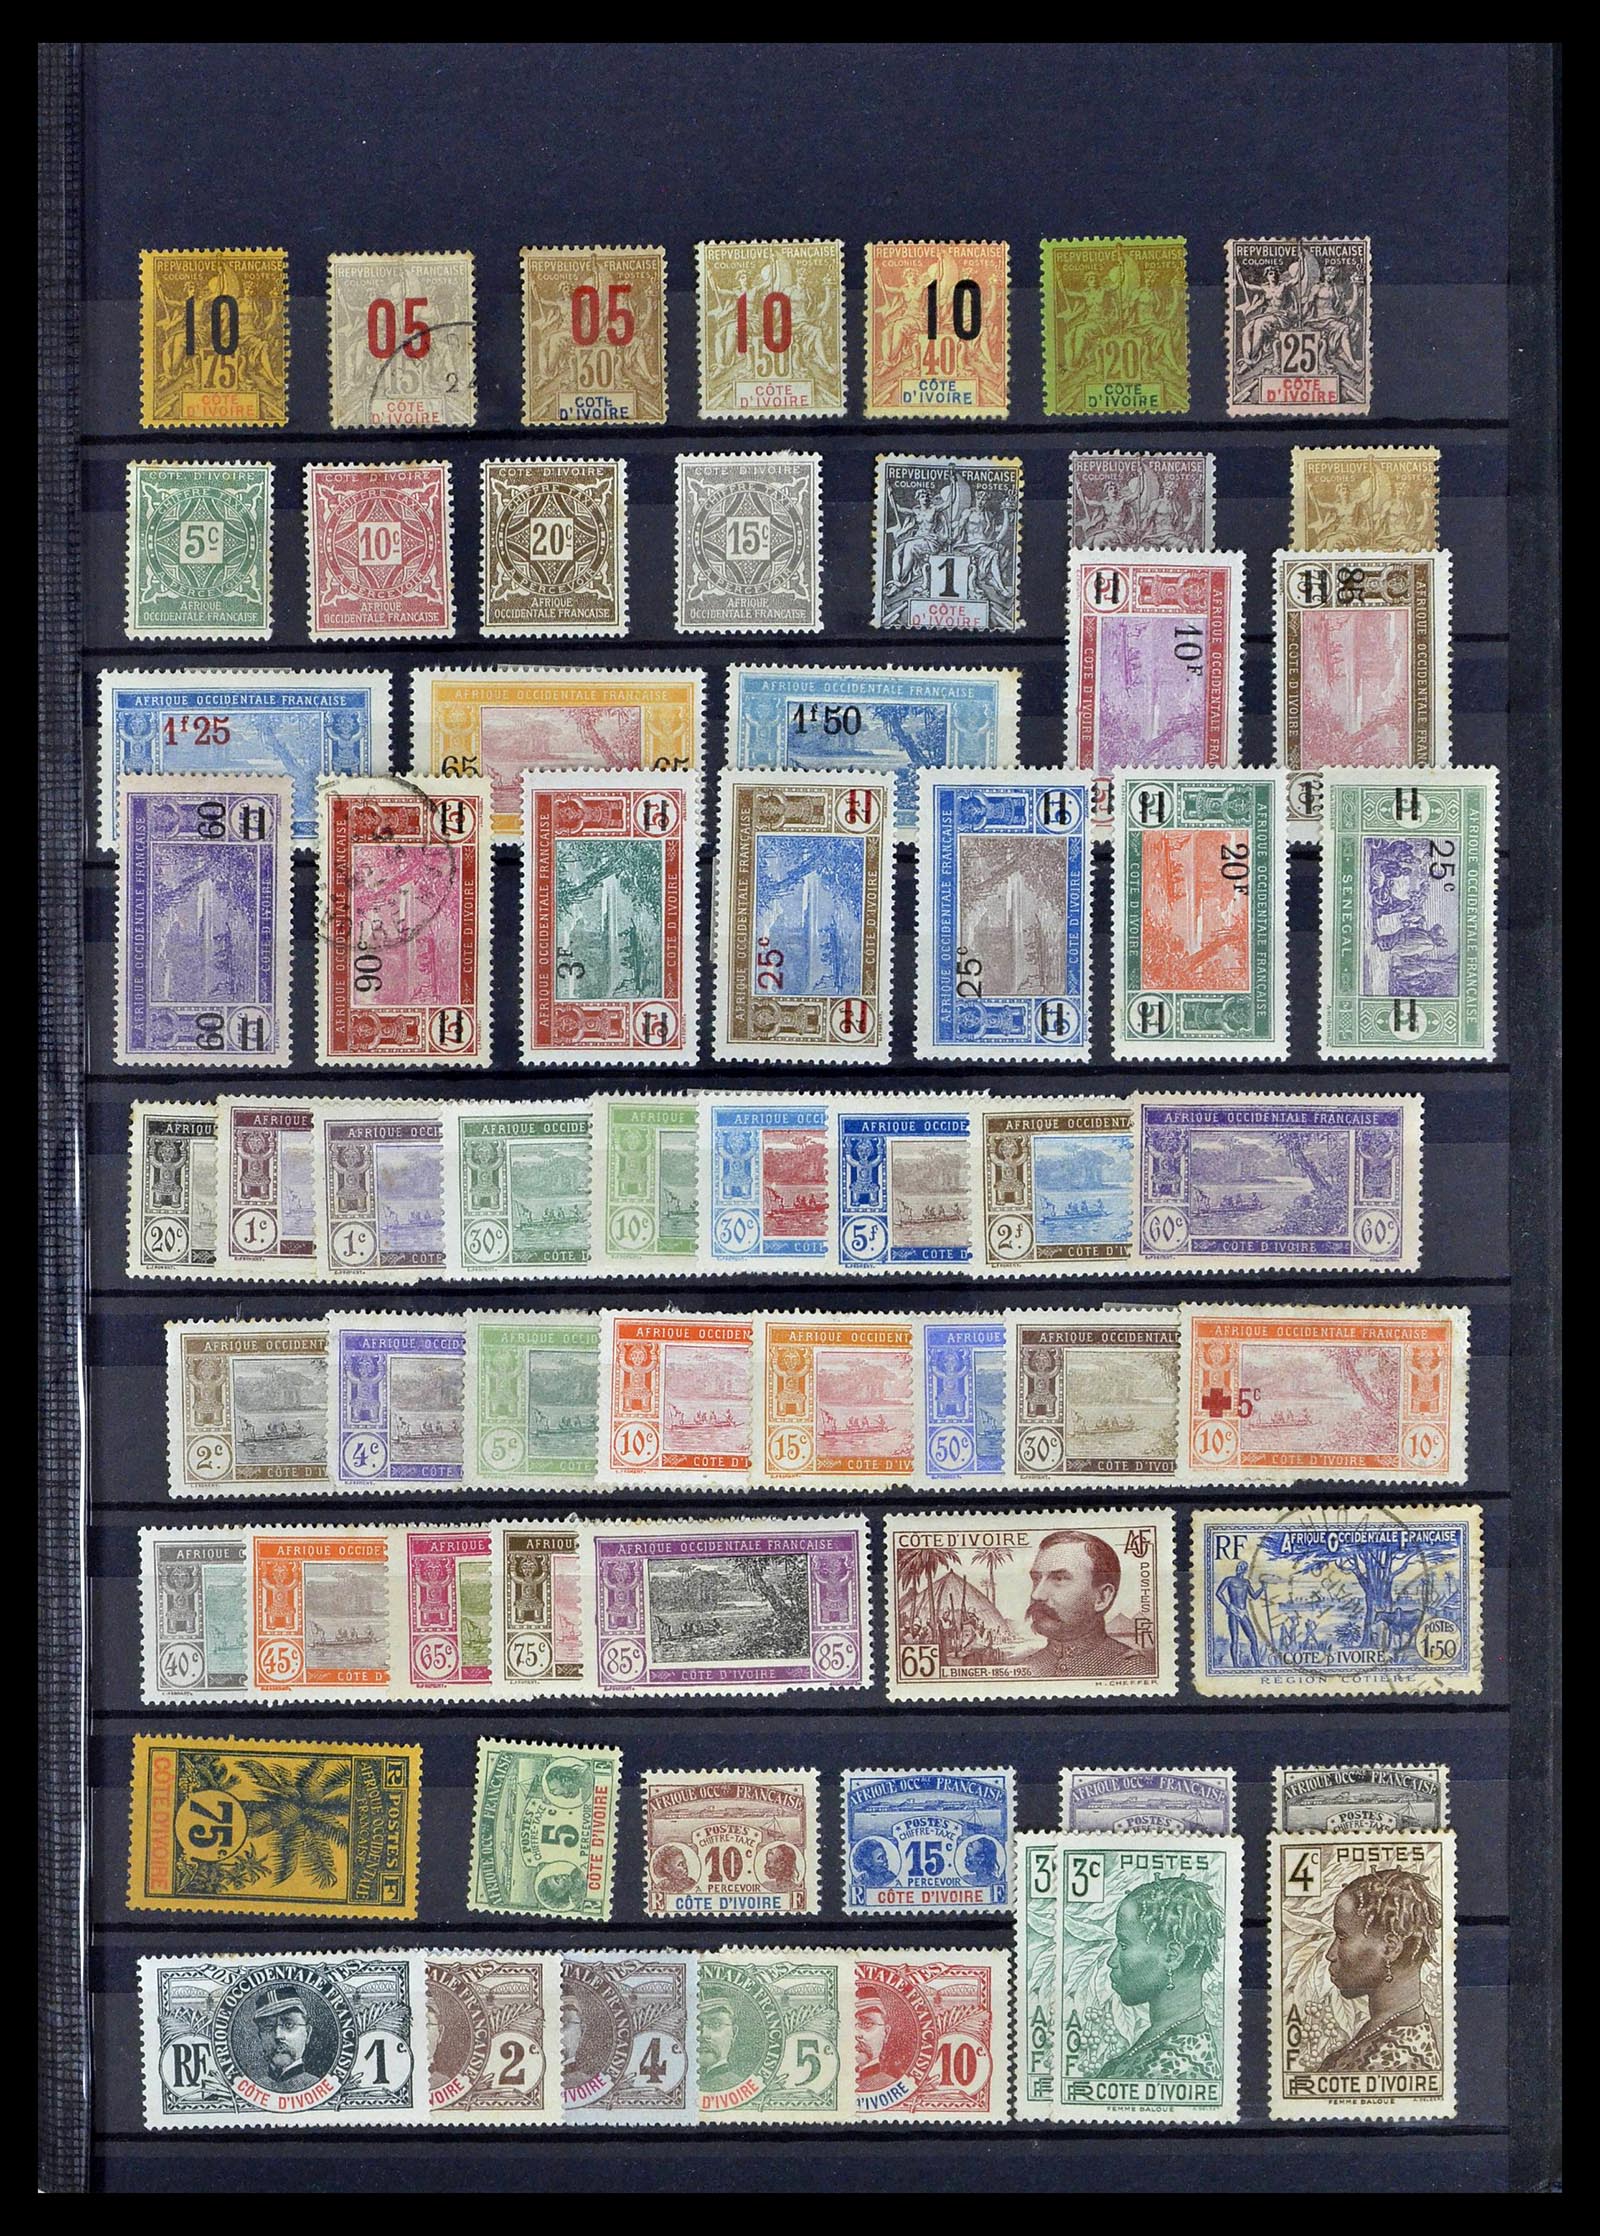 39097 0011 - Stamp collection 39097 French colonies 1880-2000.